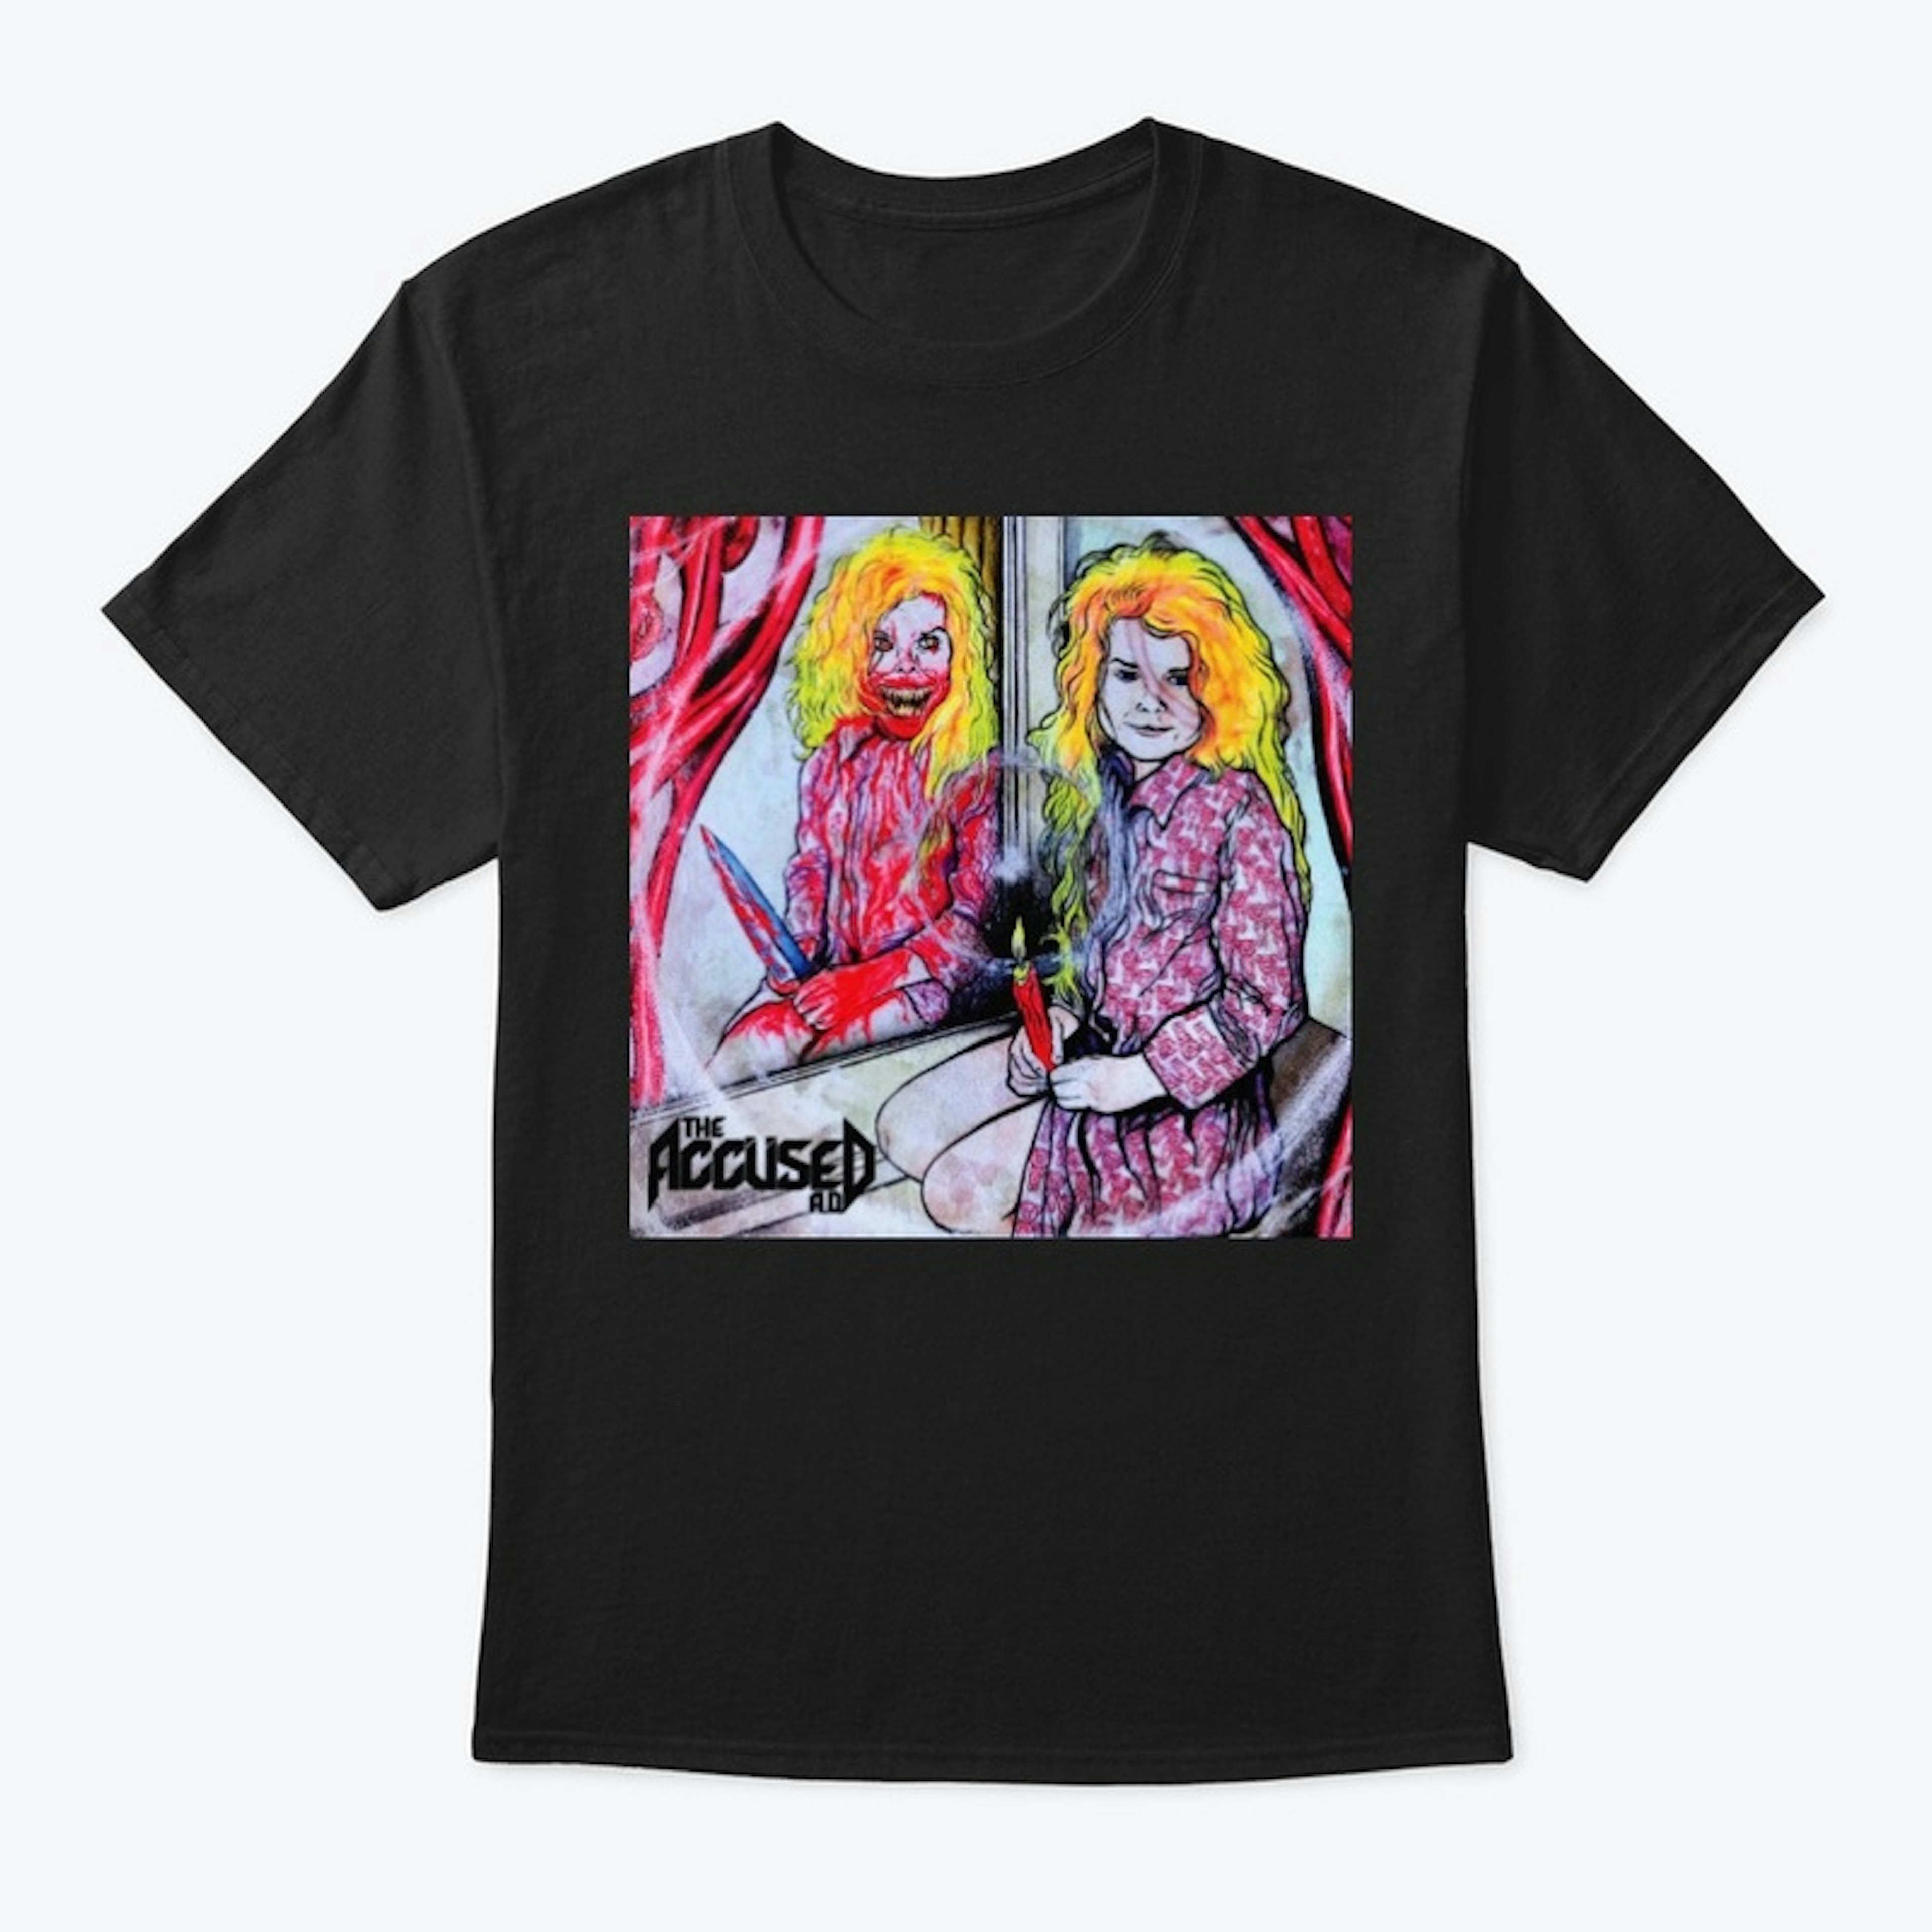 The Accused AD "Ghoul" T-Shirt